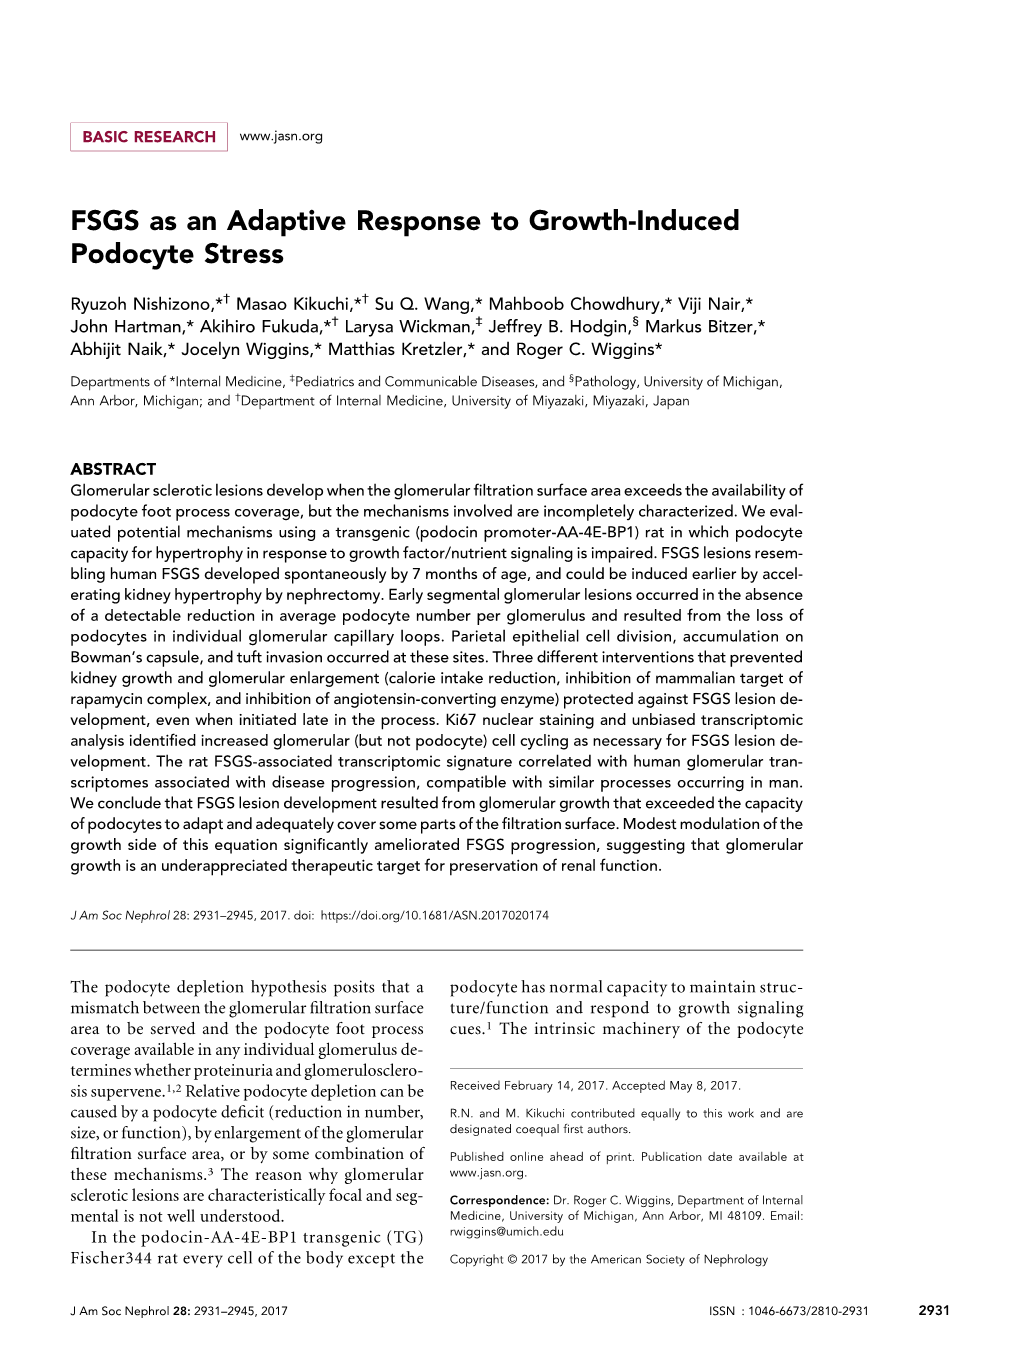 FSGS As an Adaptive Response to Growth-Induced Podocyte Stress